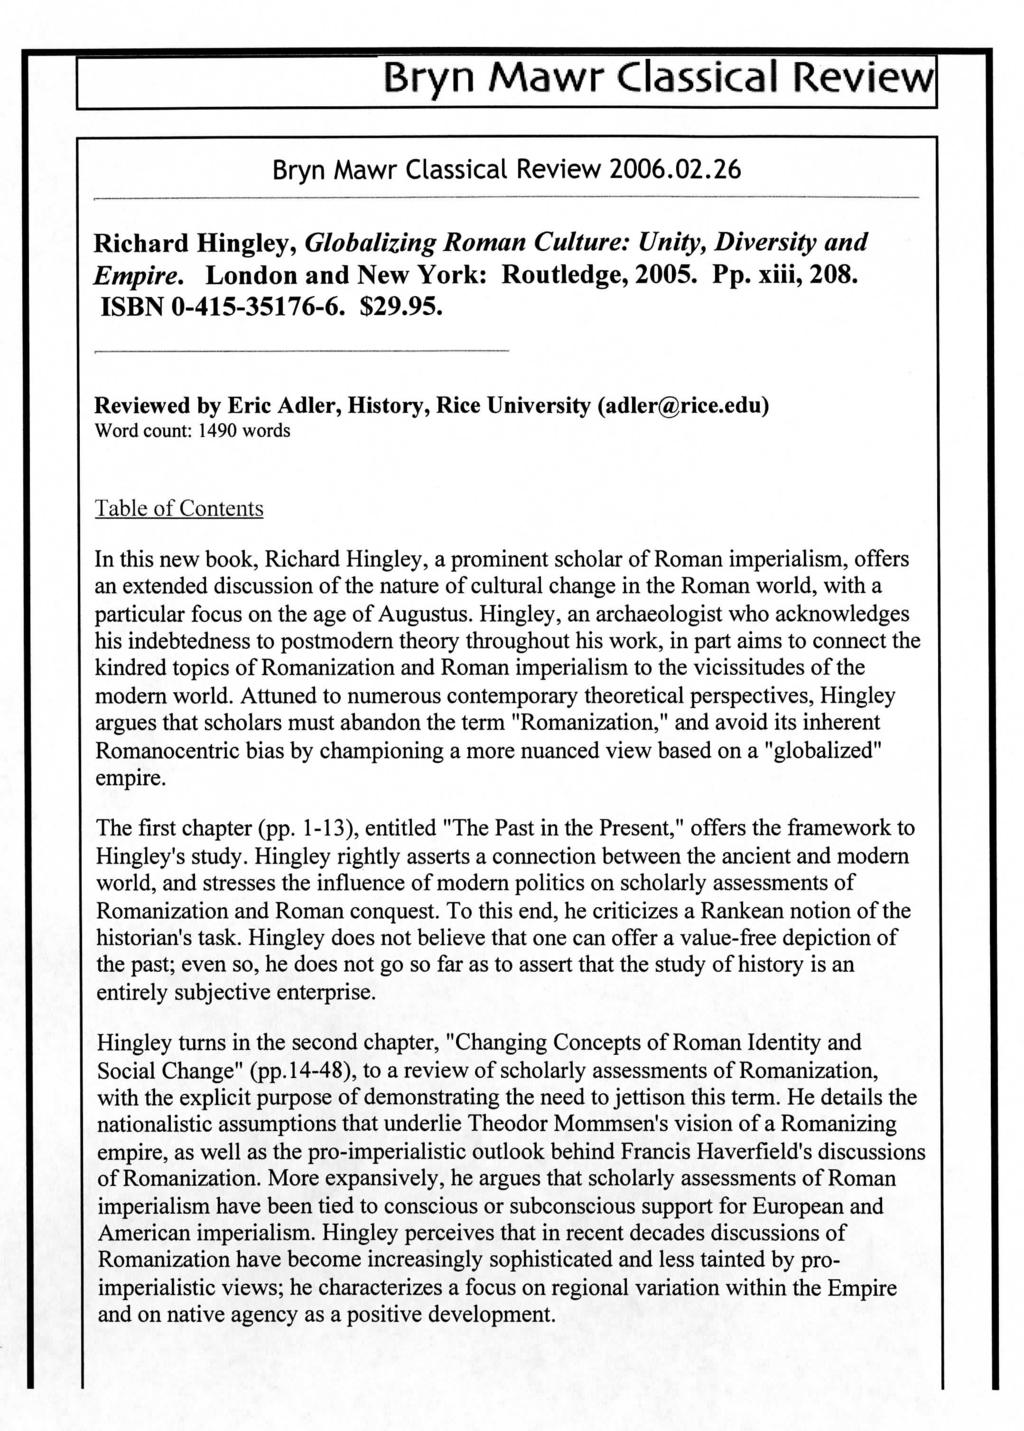 Bryn Mawr Classical Review Bryn Mawr Classical Review 2006.02.26 Richard Hingley, Globalizing Roman Culture: Unity, Diversity and Empire. London and New York: Routledge, 2005. Pp. xiii, 208.